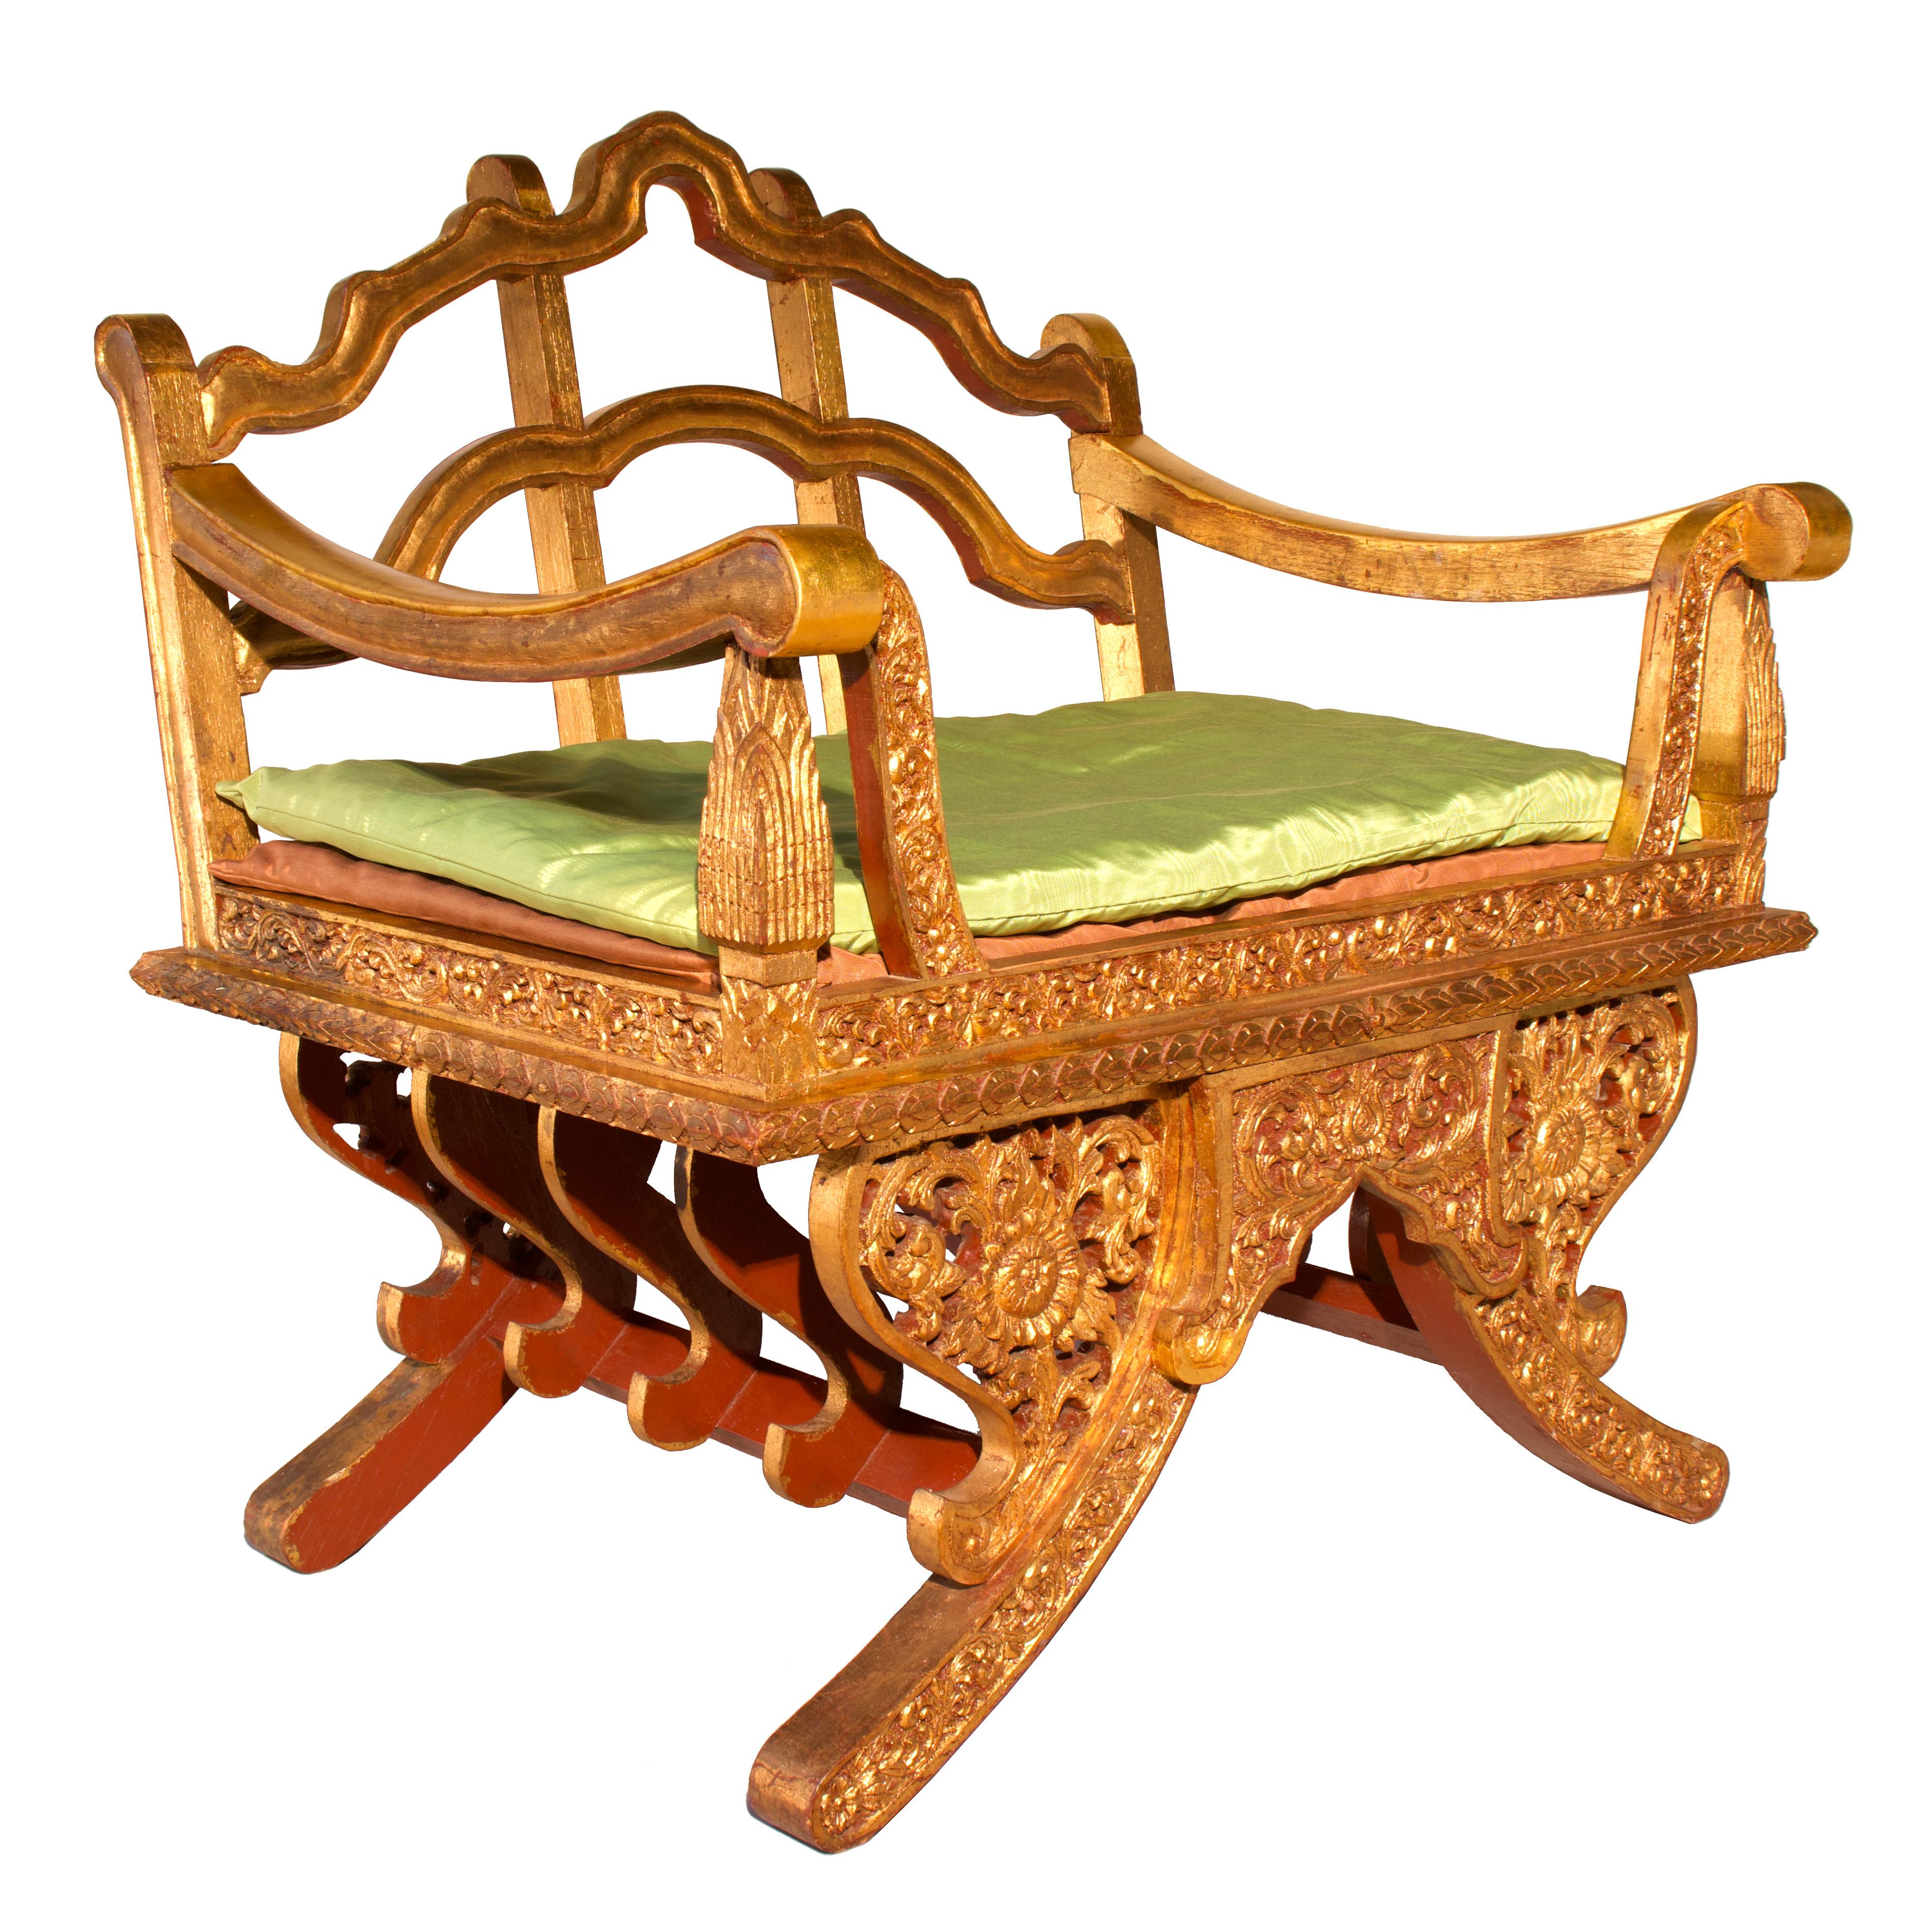 Vintage Thai Howdah-style Meditation Chair, teak, lacquer, gold leaf, Mid-20th century. A highly decorative and ornately carved throne, evocative of the royal processionals of Siam. A sturdy construction consisting of four bowed legs to straddle the